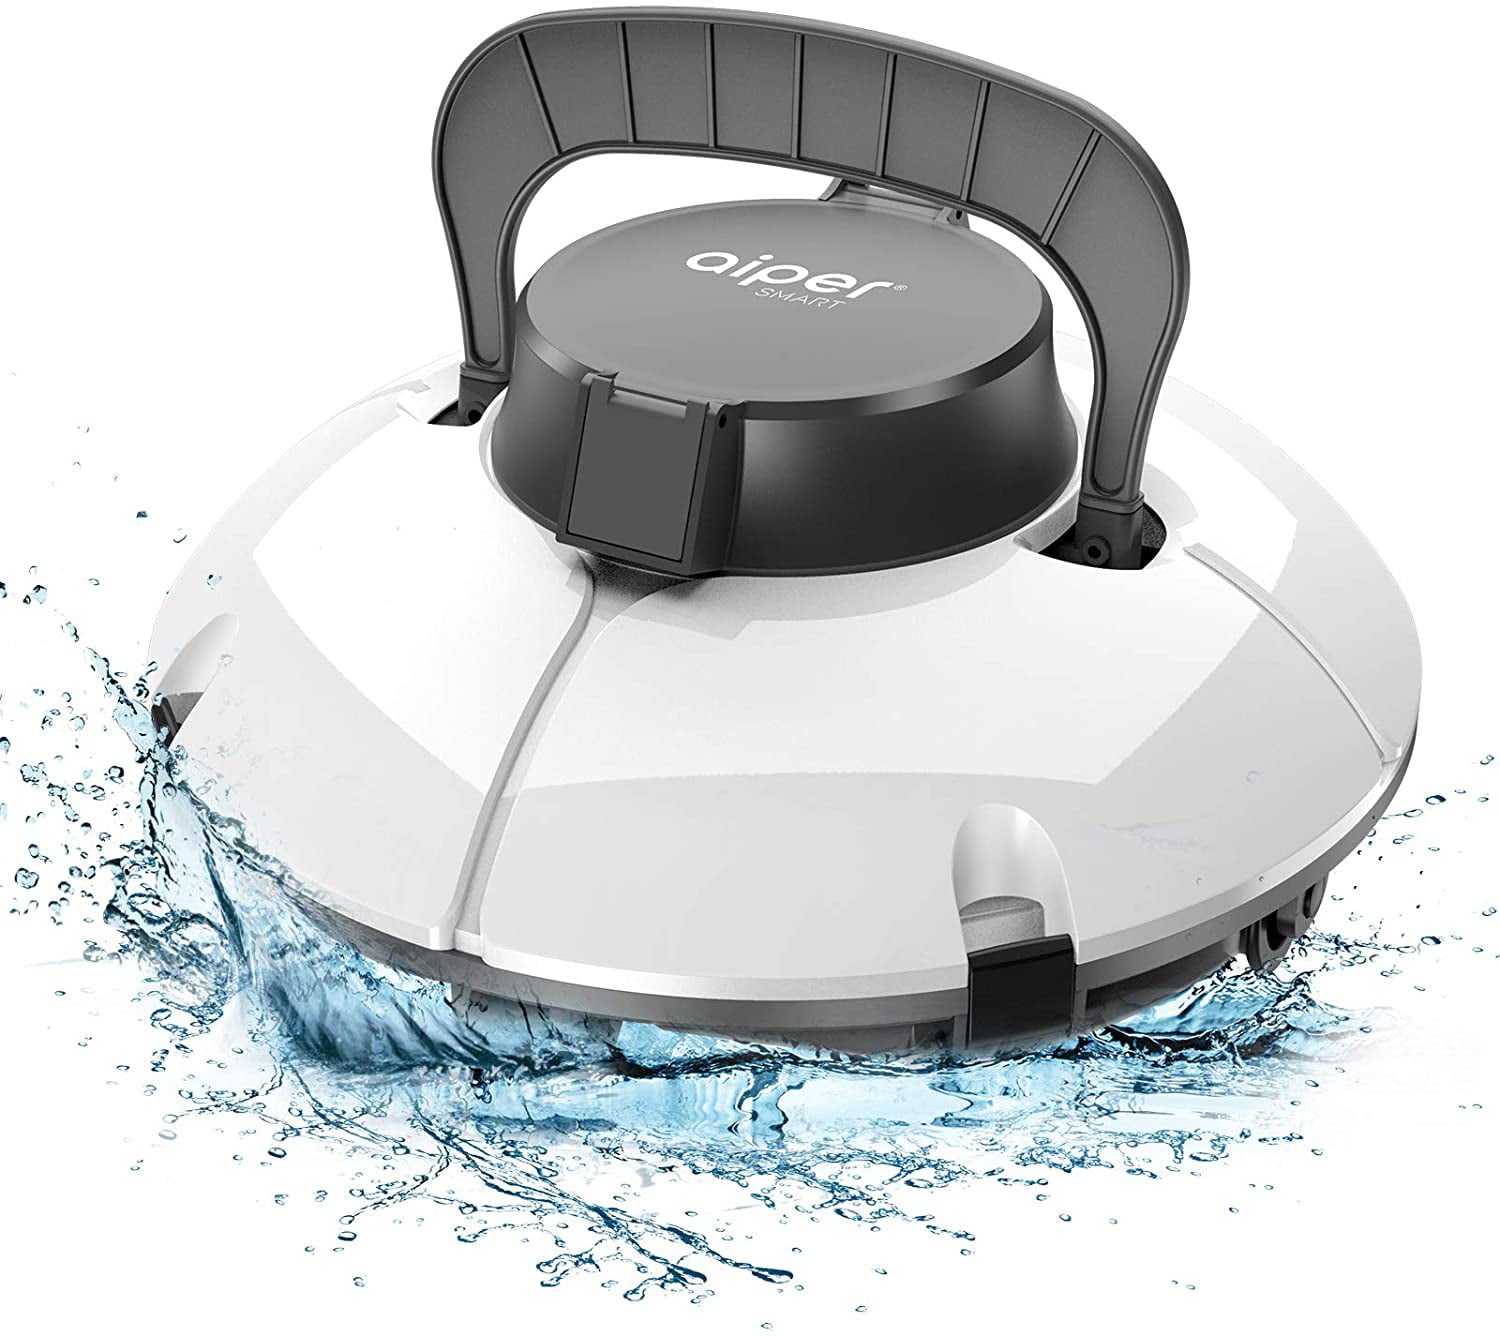 AIPER SMART Automatic Robotic Pool Cleaner with Powerful Dual-motors Ideal for In-Ground/Above Ground Pools Up To 50 Feet Tangle-Free Swivel Cord&Wall Climbing Large Top Load Cartridge Filter 